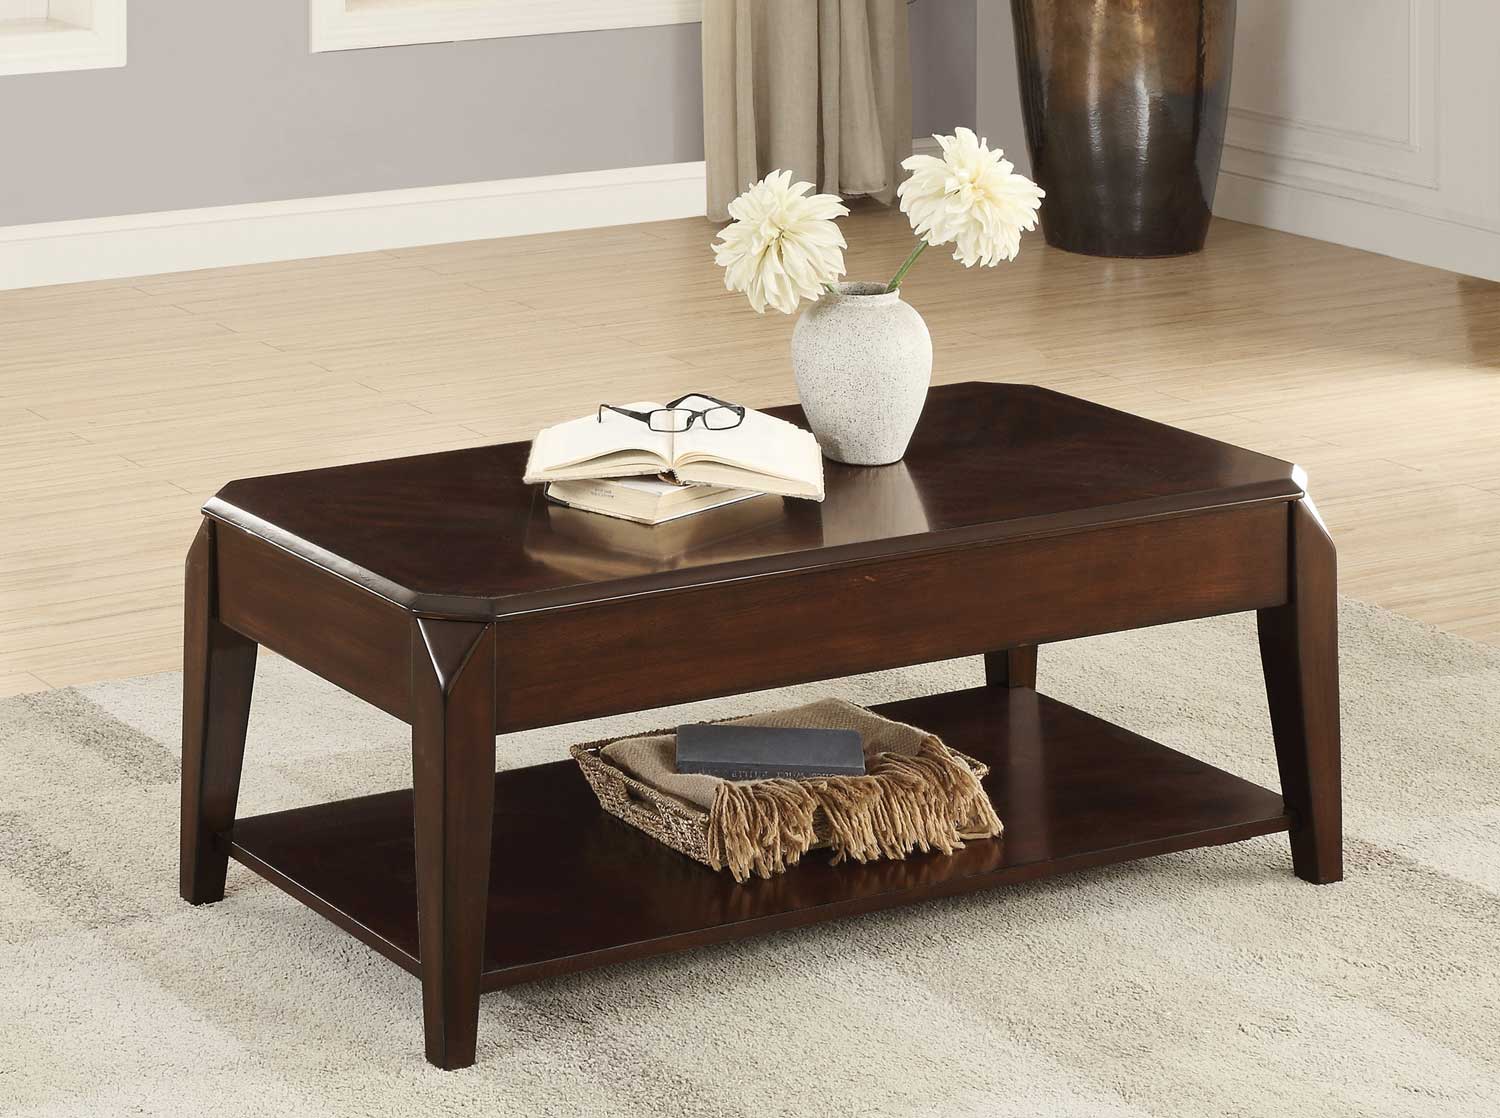 Homelegance Sikeston Cocktail Table with Lift Top on Casters - Warm Cherry